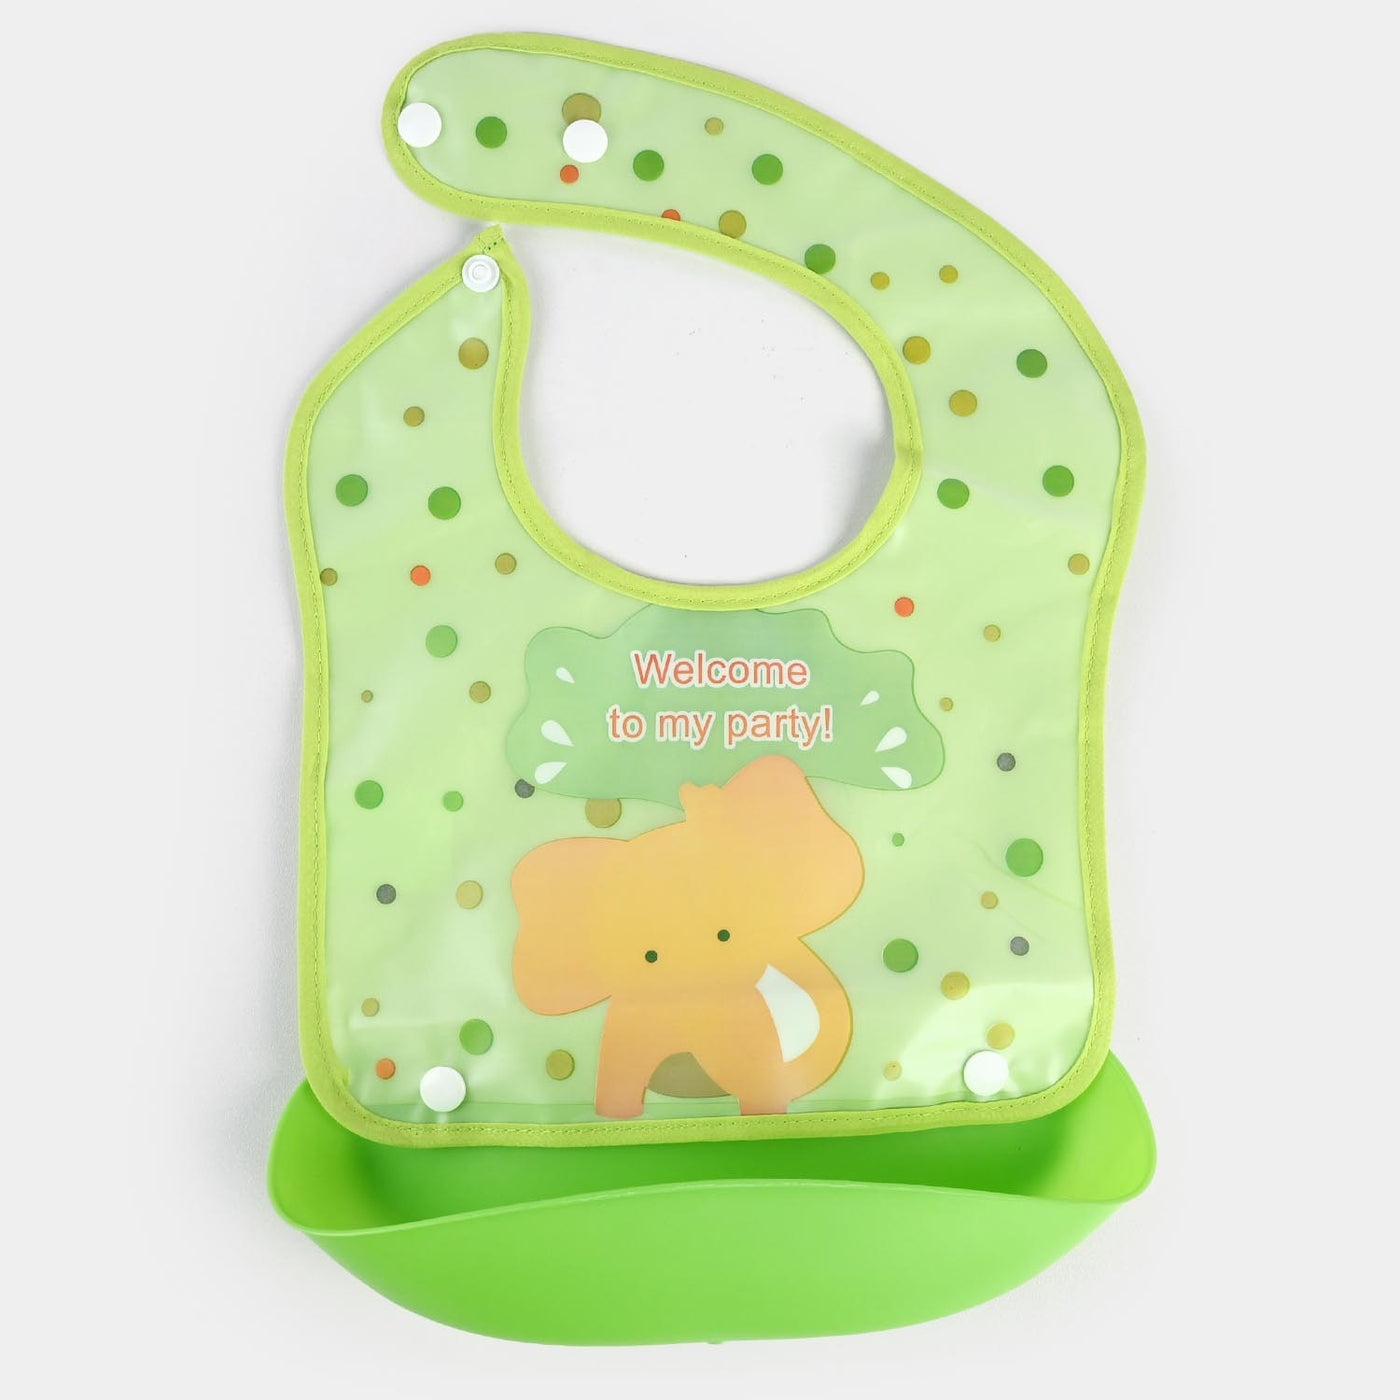 PLASTIC BIB WITH HOLDER FOR BABIES - GREEN